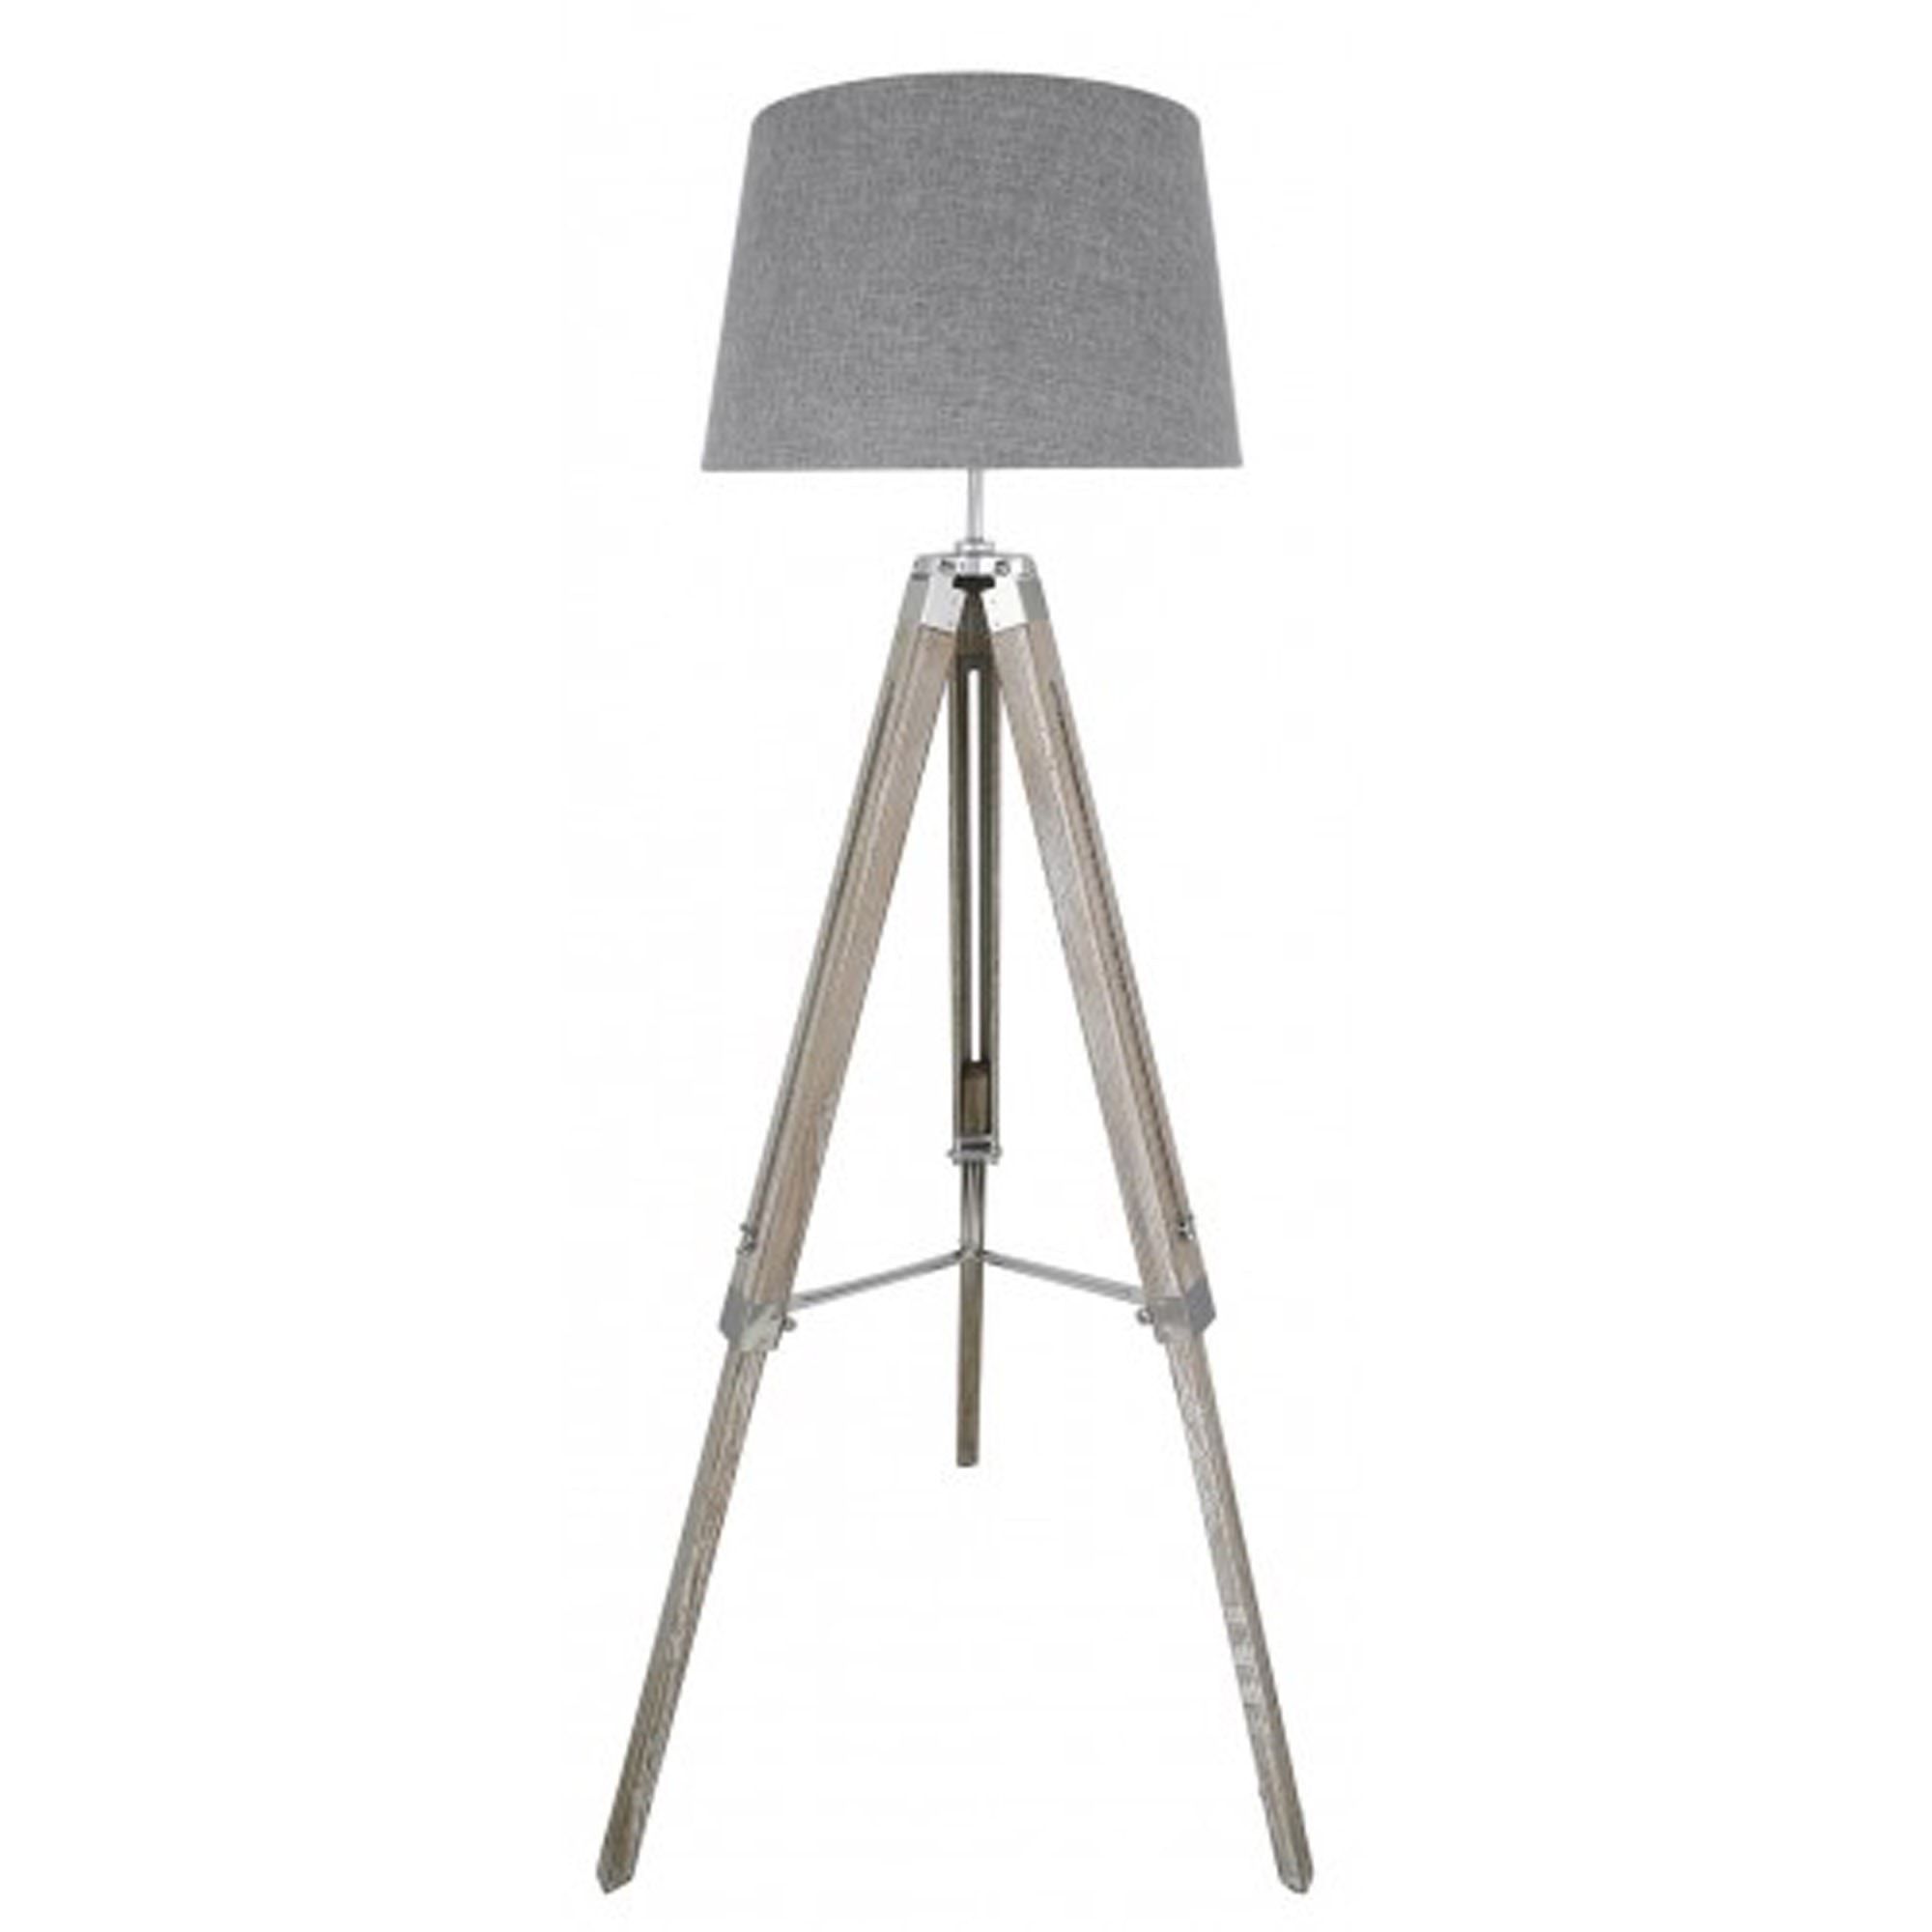 Grey Shade Standing Lamps For Favorite Hollywood Floor Lamp With Grey Shade (View 7 of 15)